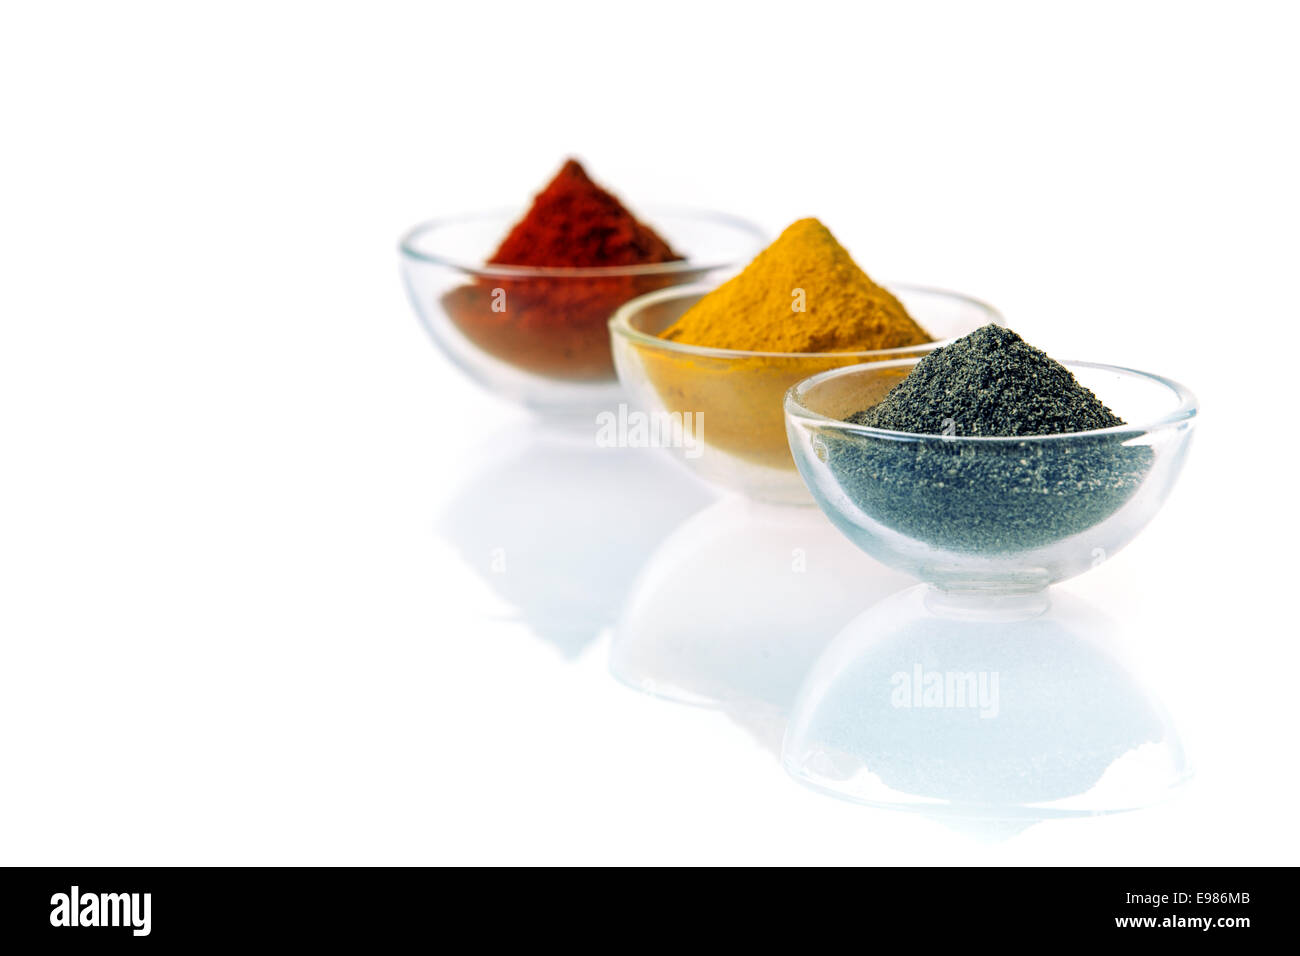 Neat conical heaps of black lava salt, curry and chilli or red pepper powder in clear transparent glass bowls on a white background with reflection and copyspace Stock Photo